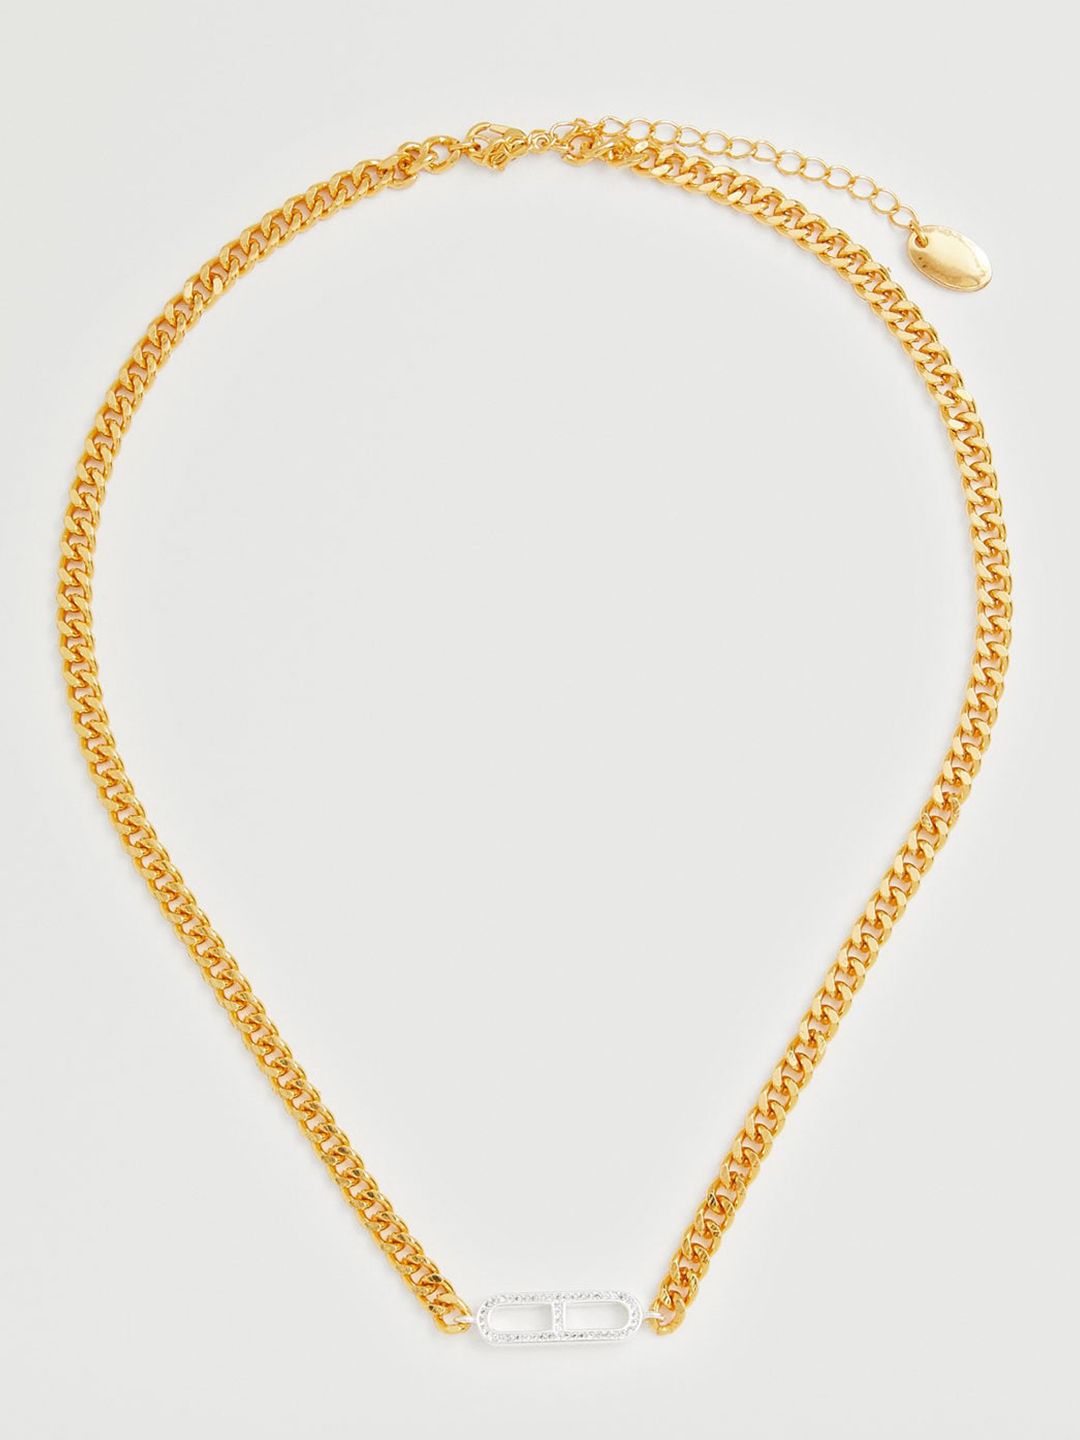 MANGO Gold-Toned & Silver-Toned Stone Studded Link Necklace Price in India